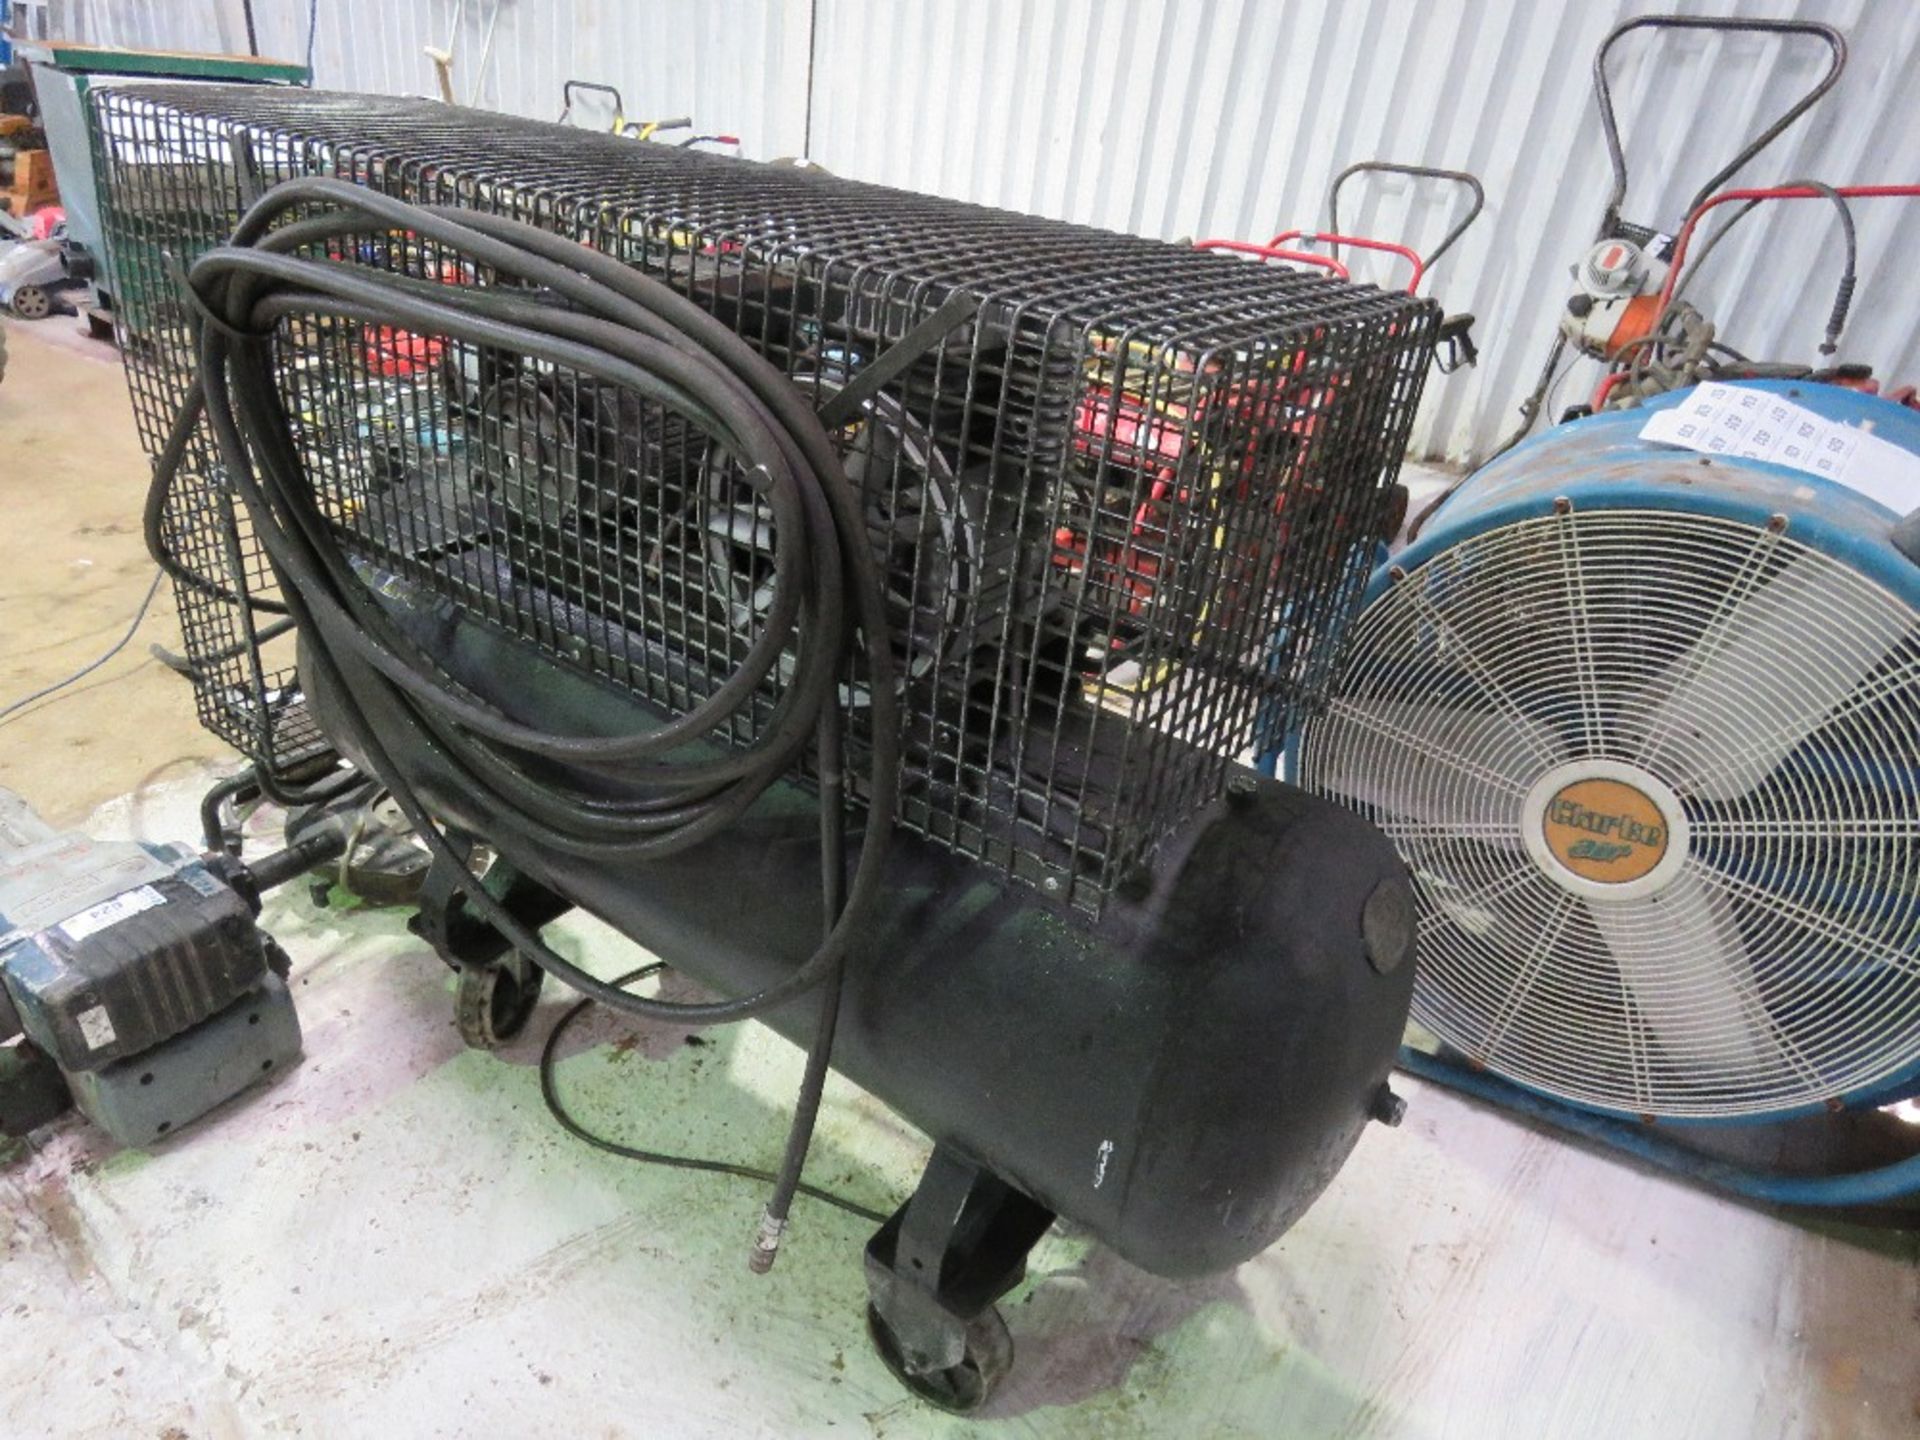 LARGE SIZED AIR COMPRESSOR ON WHEELS, 240VOLT POWERED - Image 4 of 6